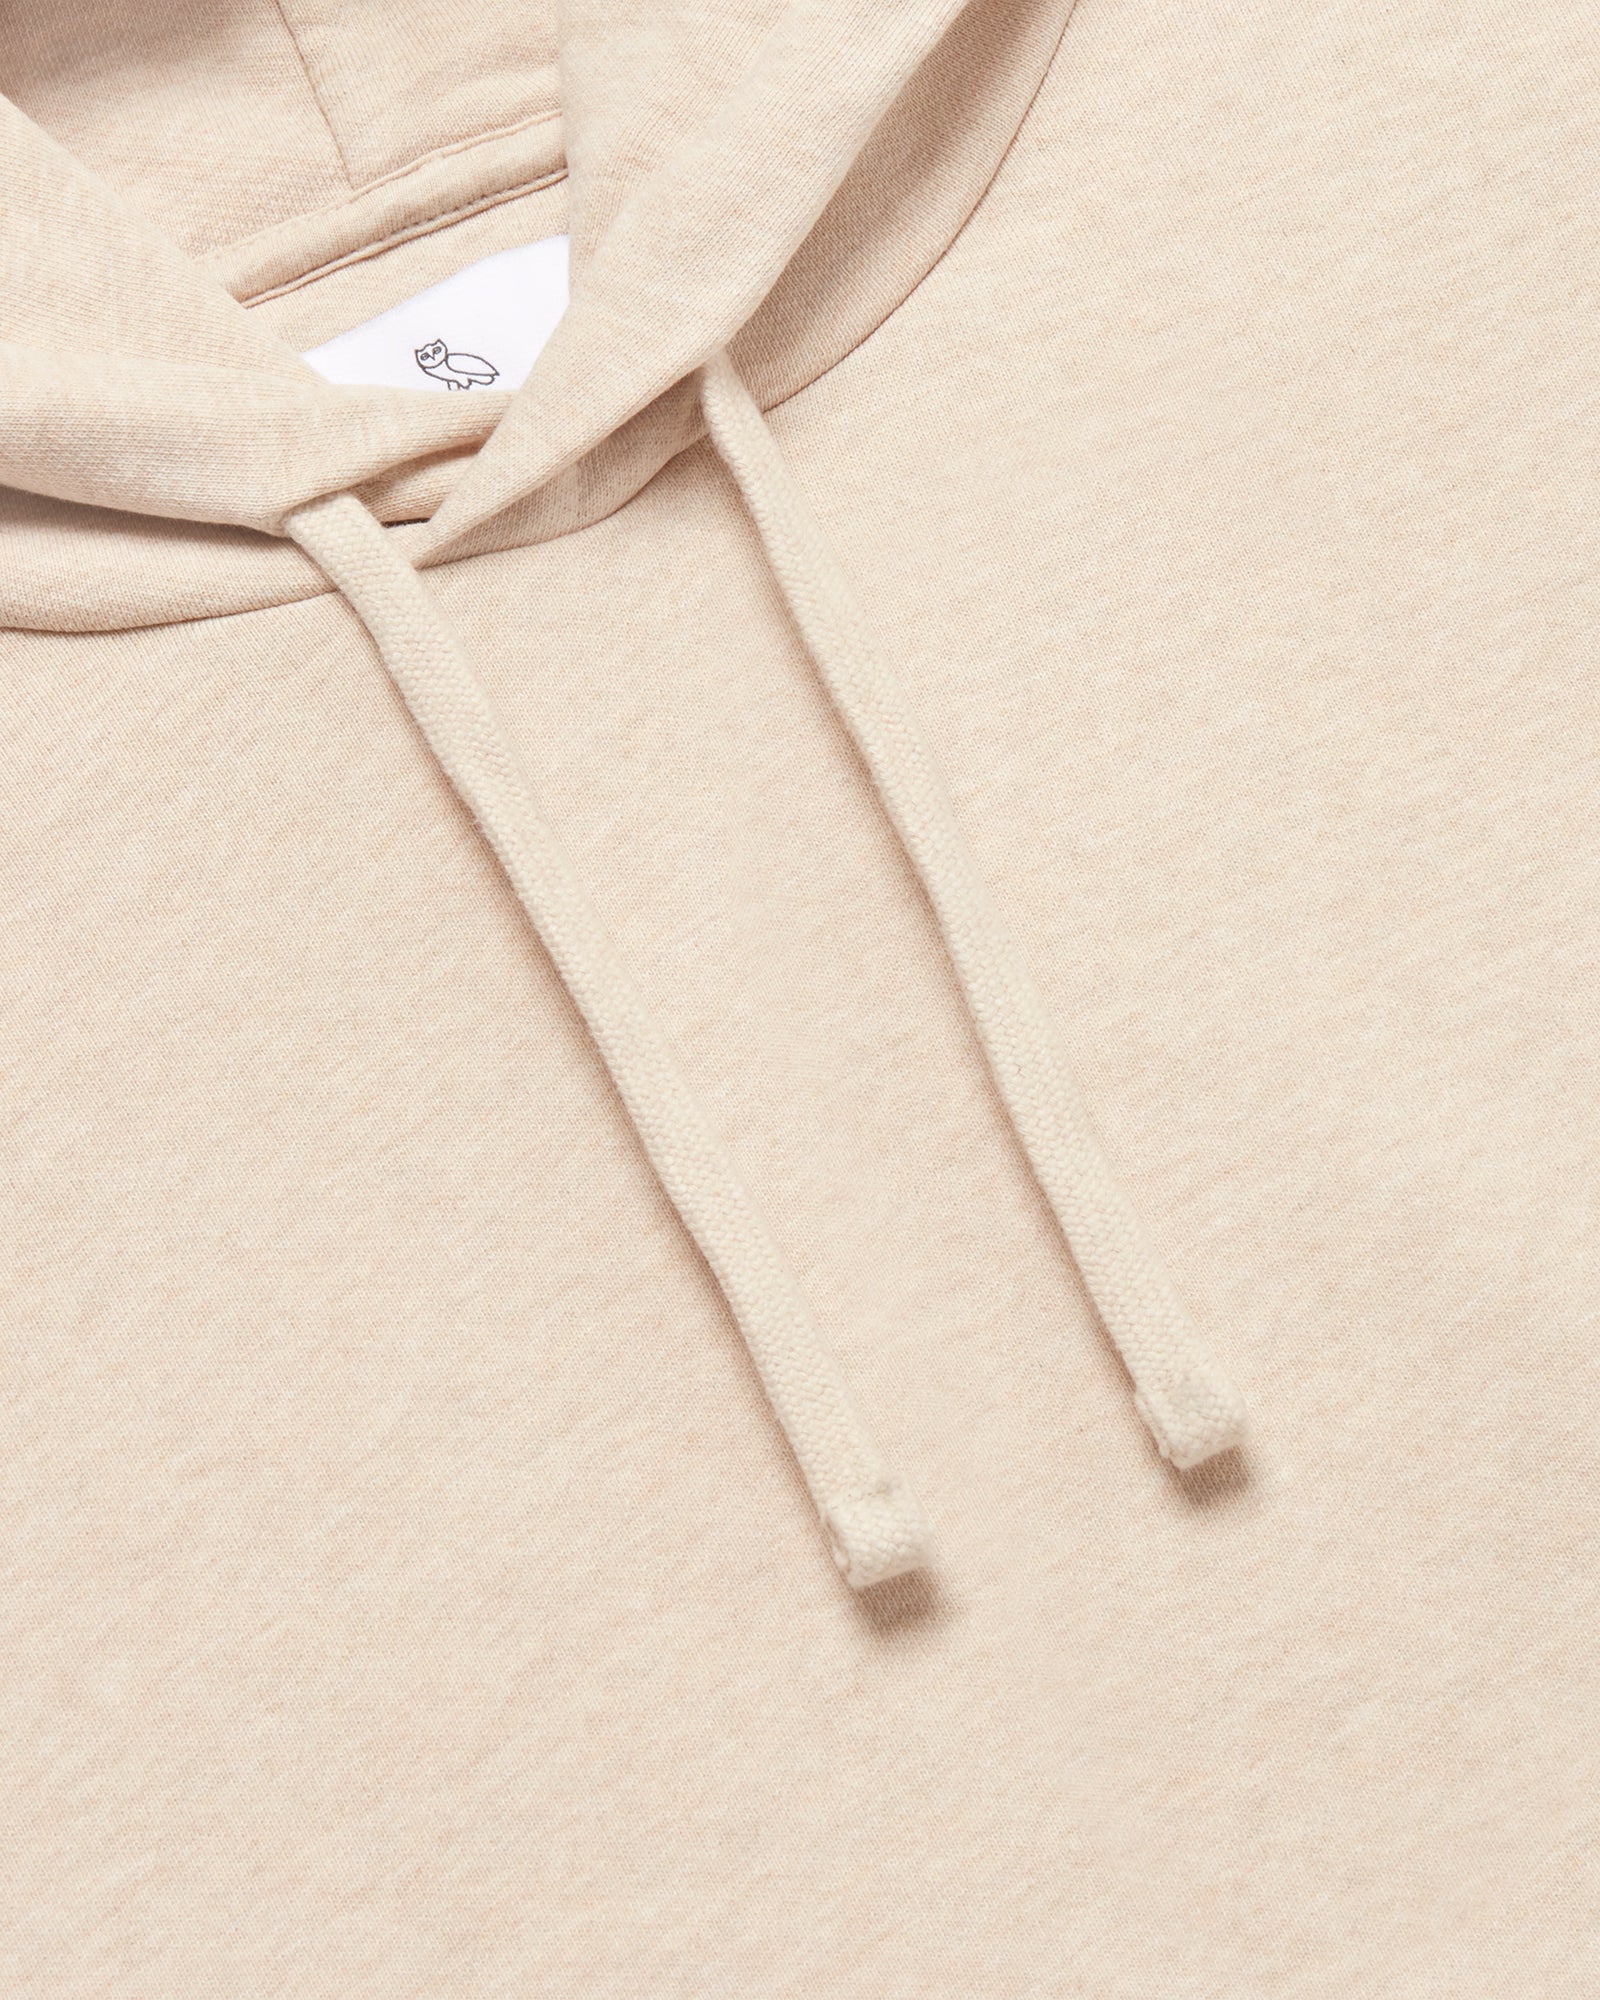 French Terry Hoodie - Oatmeal